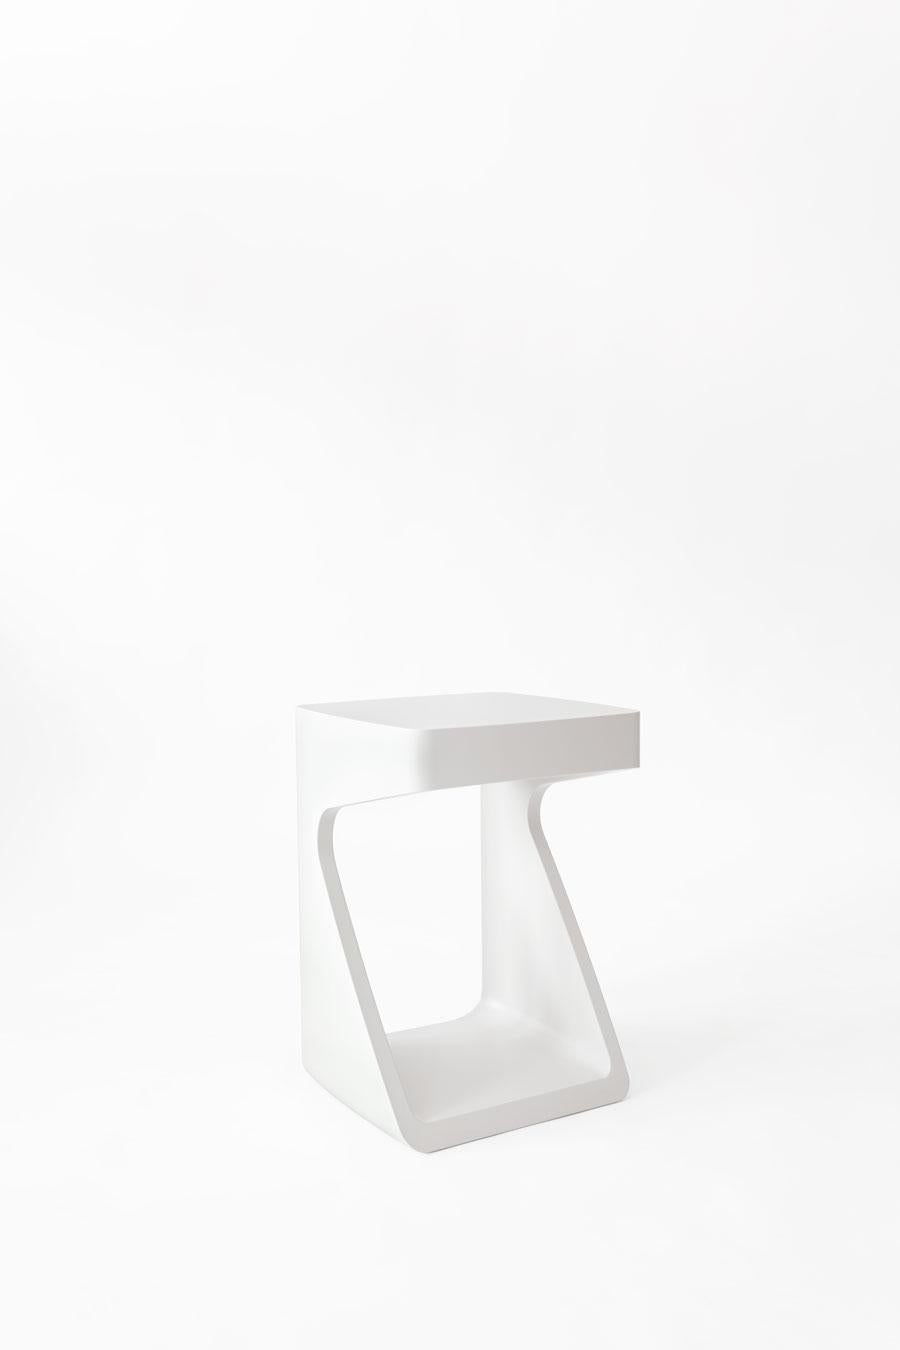 Adolfo Abejon 'Orion' side table manufactured in Barcelona

Orion is a side table made in resine composite. It is versatile, because its design allows objects to be placed inside its inferior cavity as well as on top of it. This piece works as a